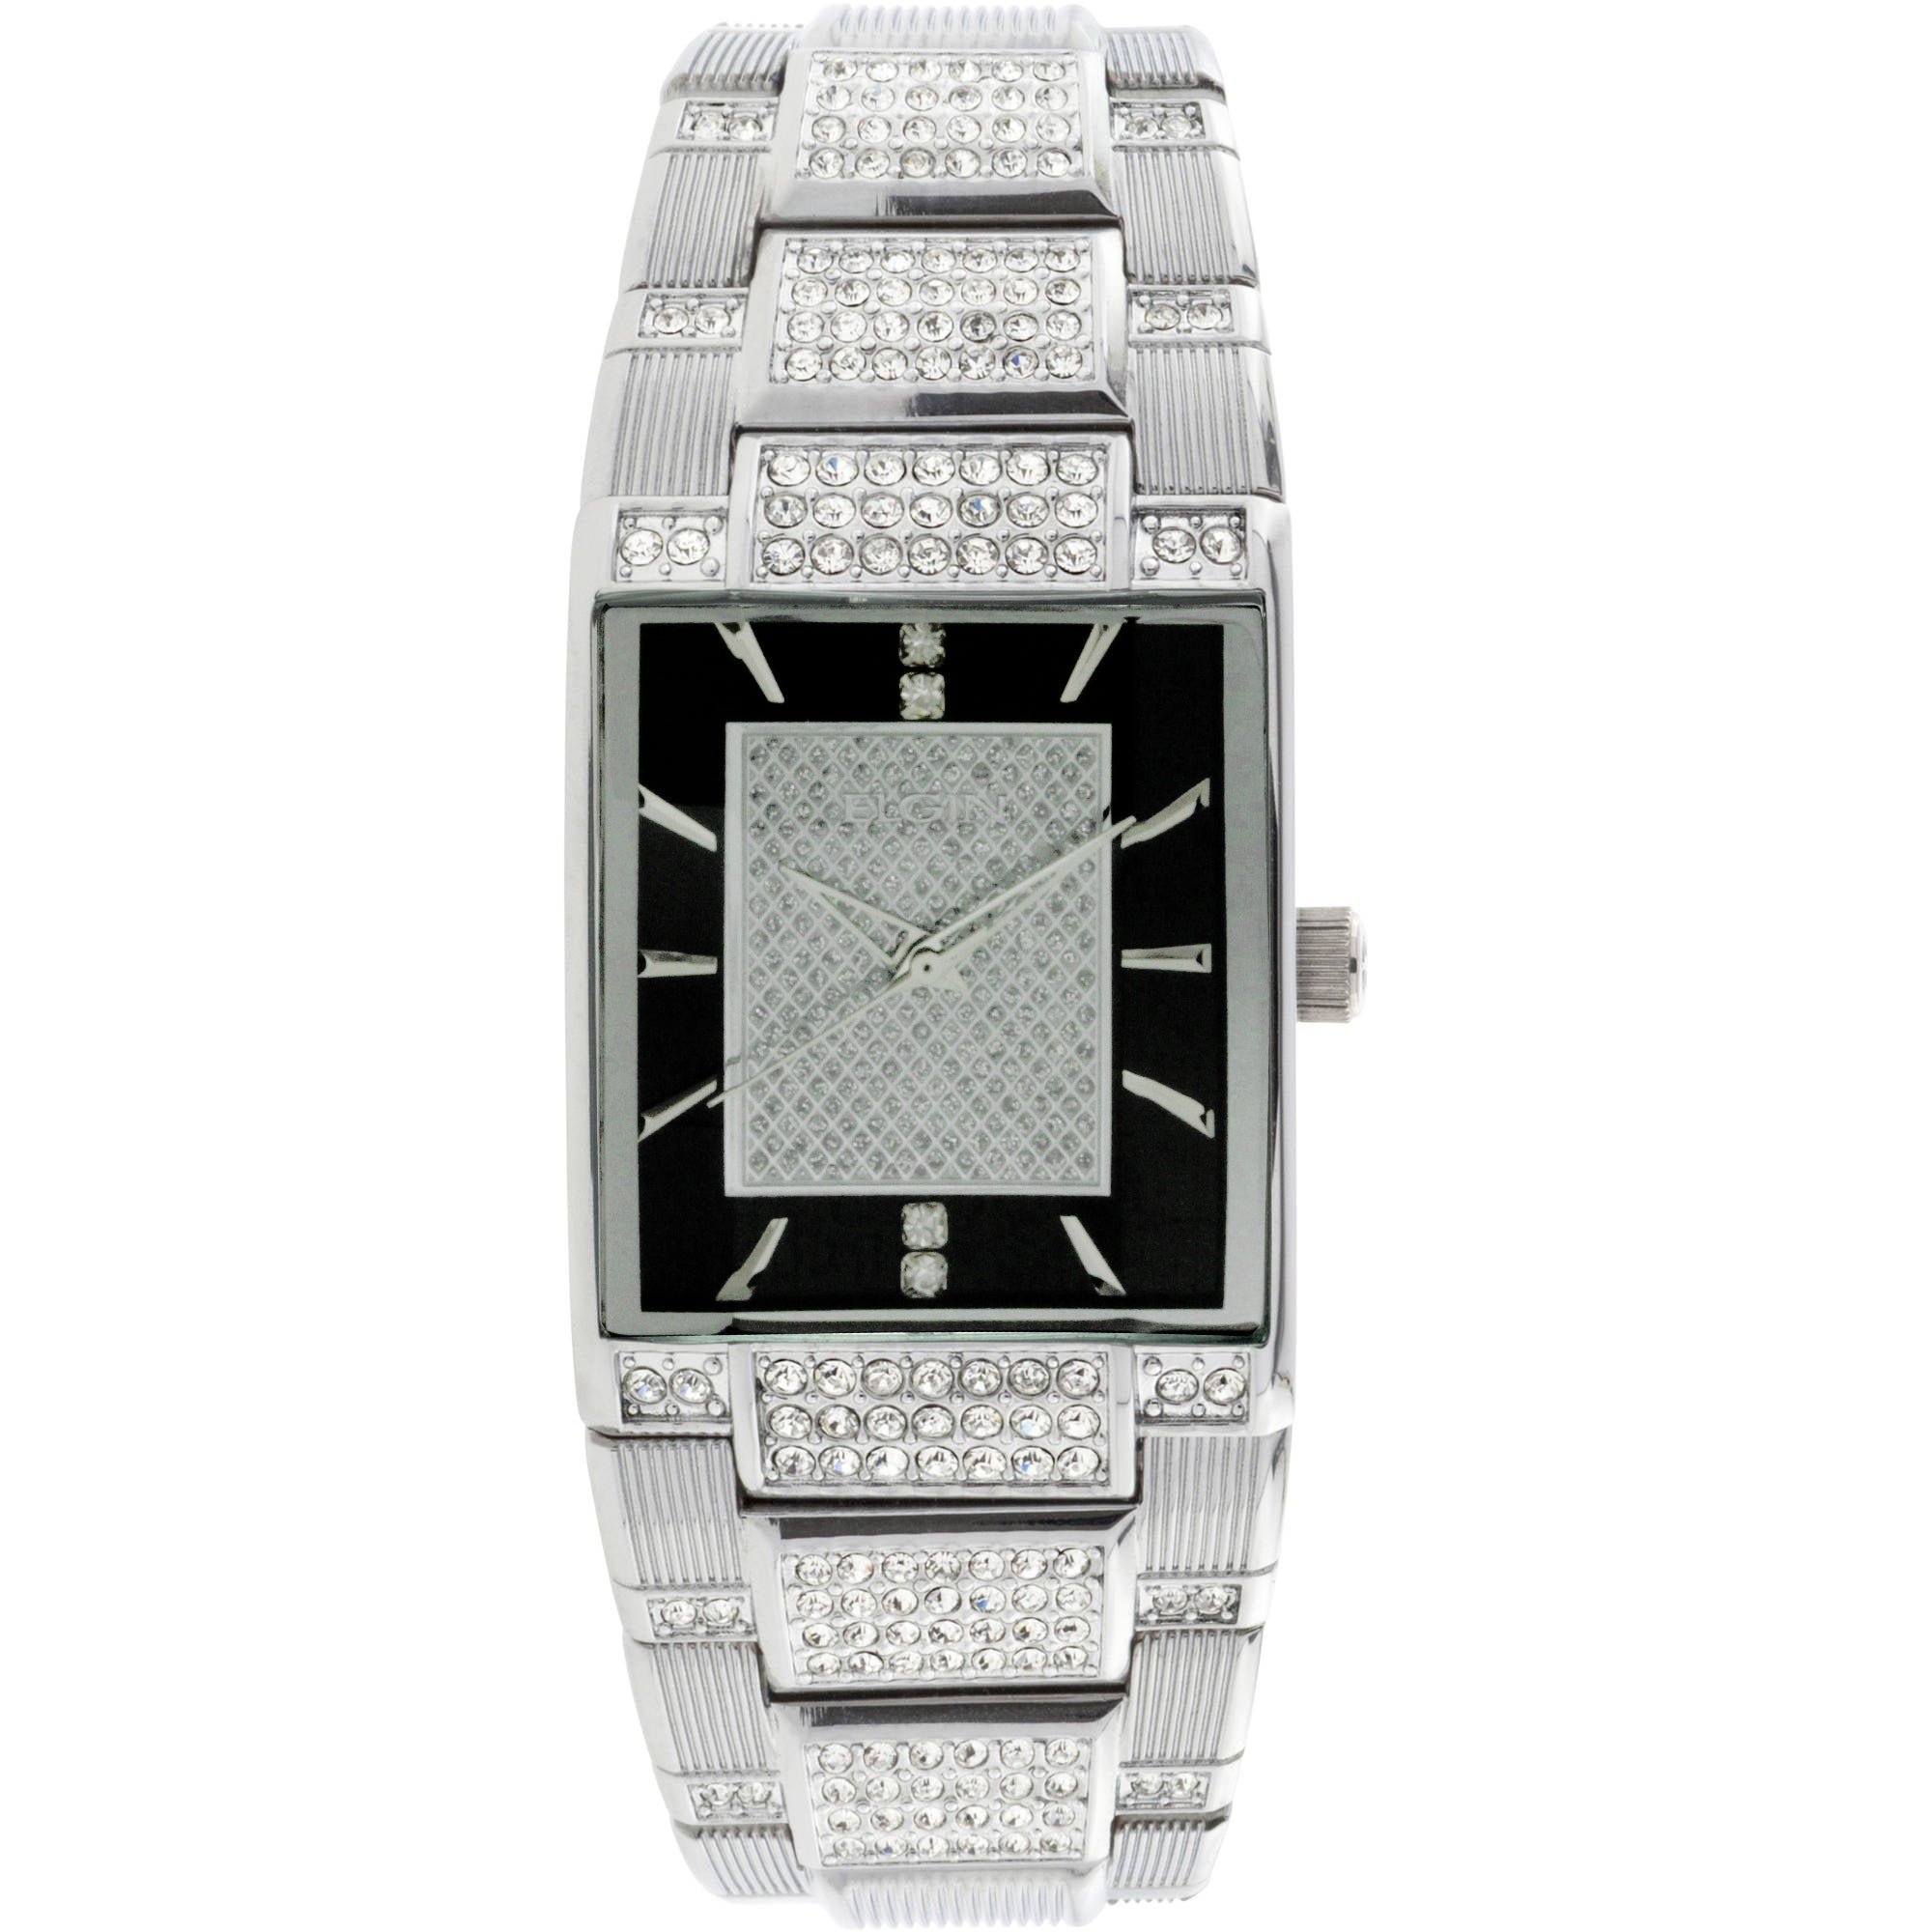 Model: Men's Elgin Silver Tone Watch with Black Dial and Crystal Accented Jewelry Clasp Bracelet